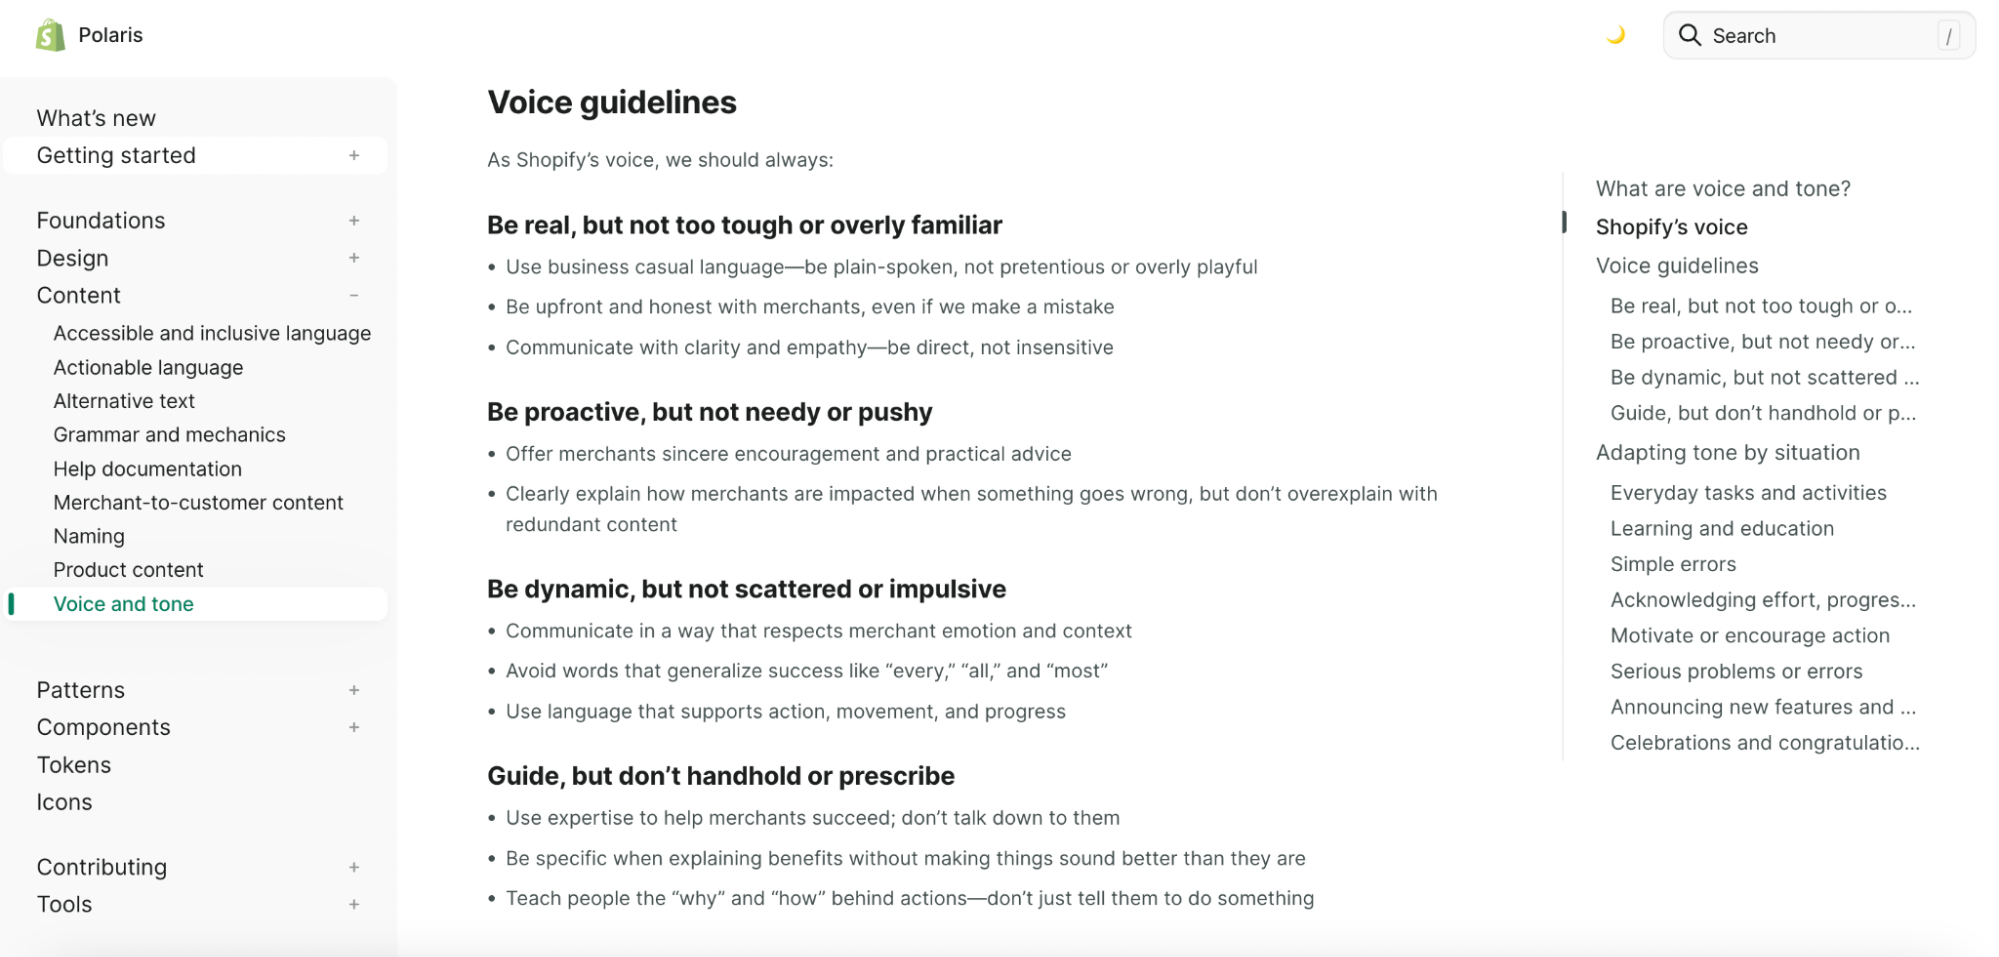 Shopify Polaris tone and voice guidelines